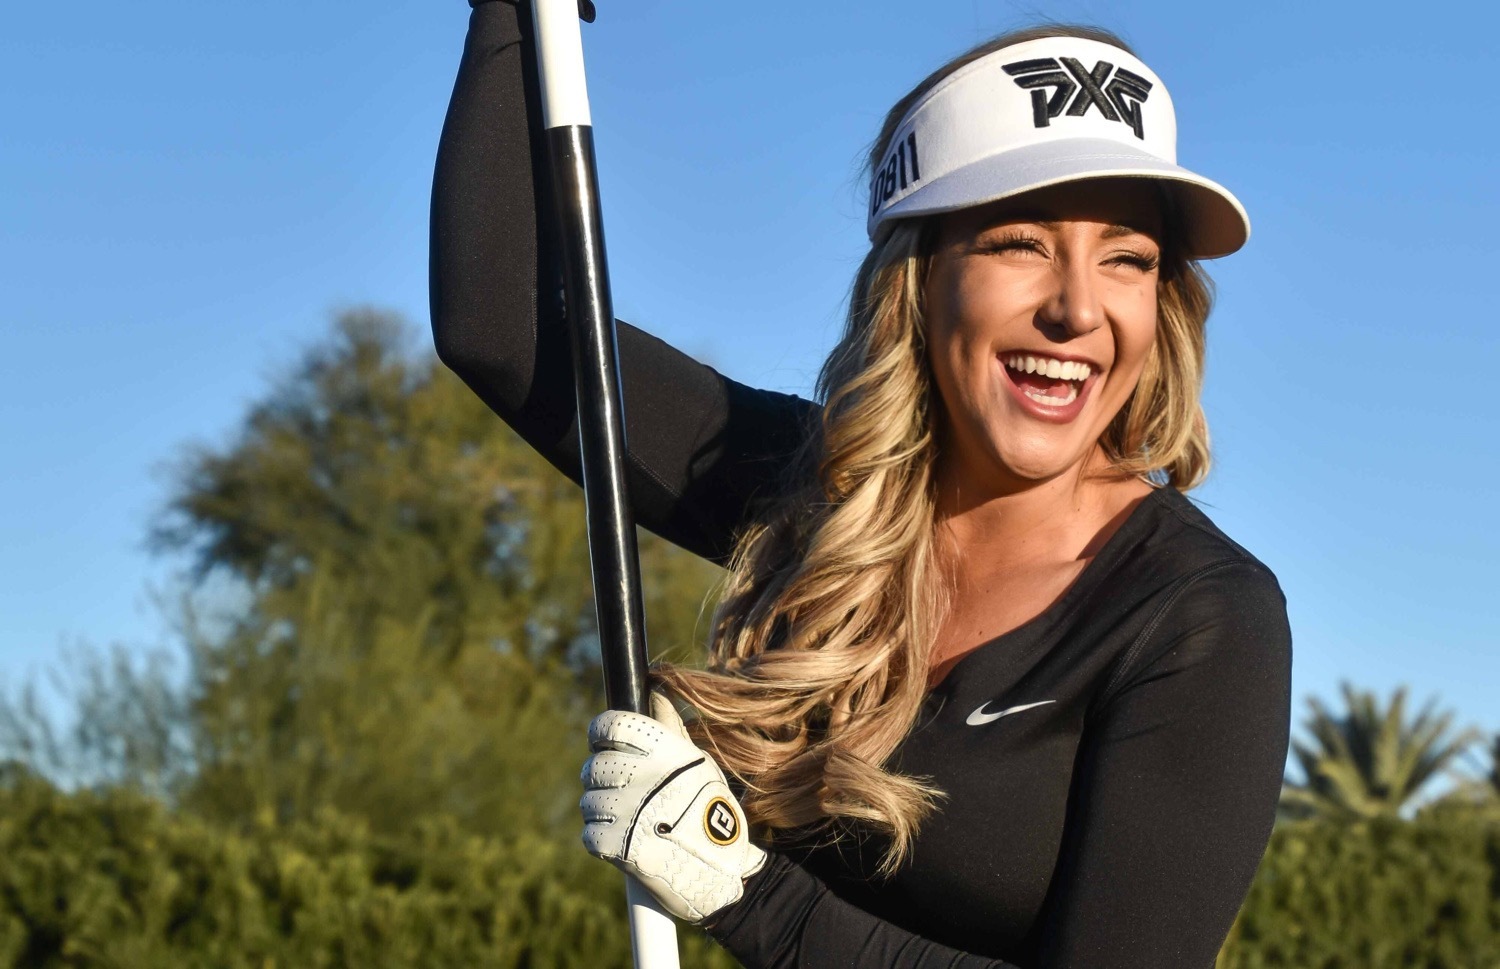 Chelsea Pezzola grew up in Lakewood Ranch and attended Saint Stephen's Episcopal, IMG Academy and Missing Link Golf Academy while here. Photo courtesy Sharon Pezzola.